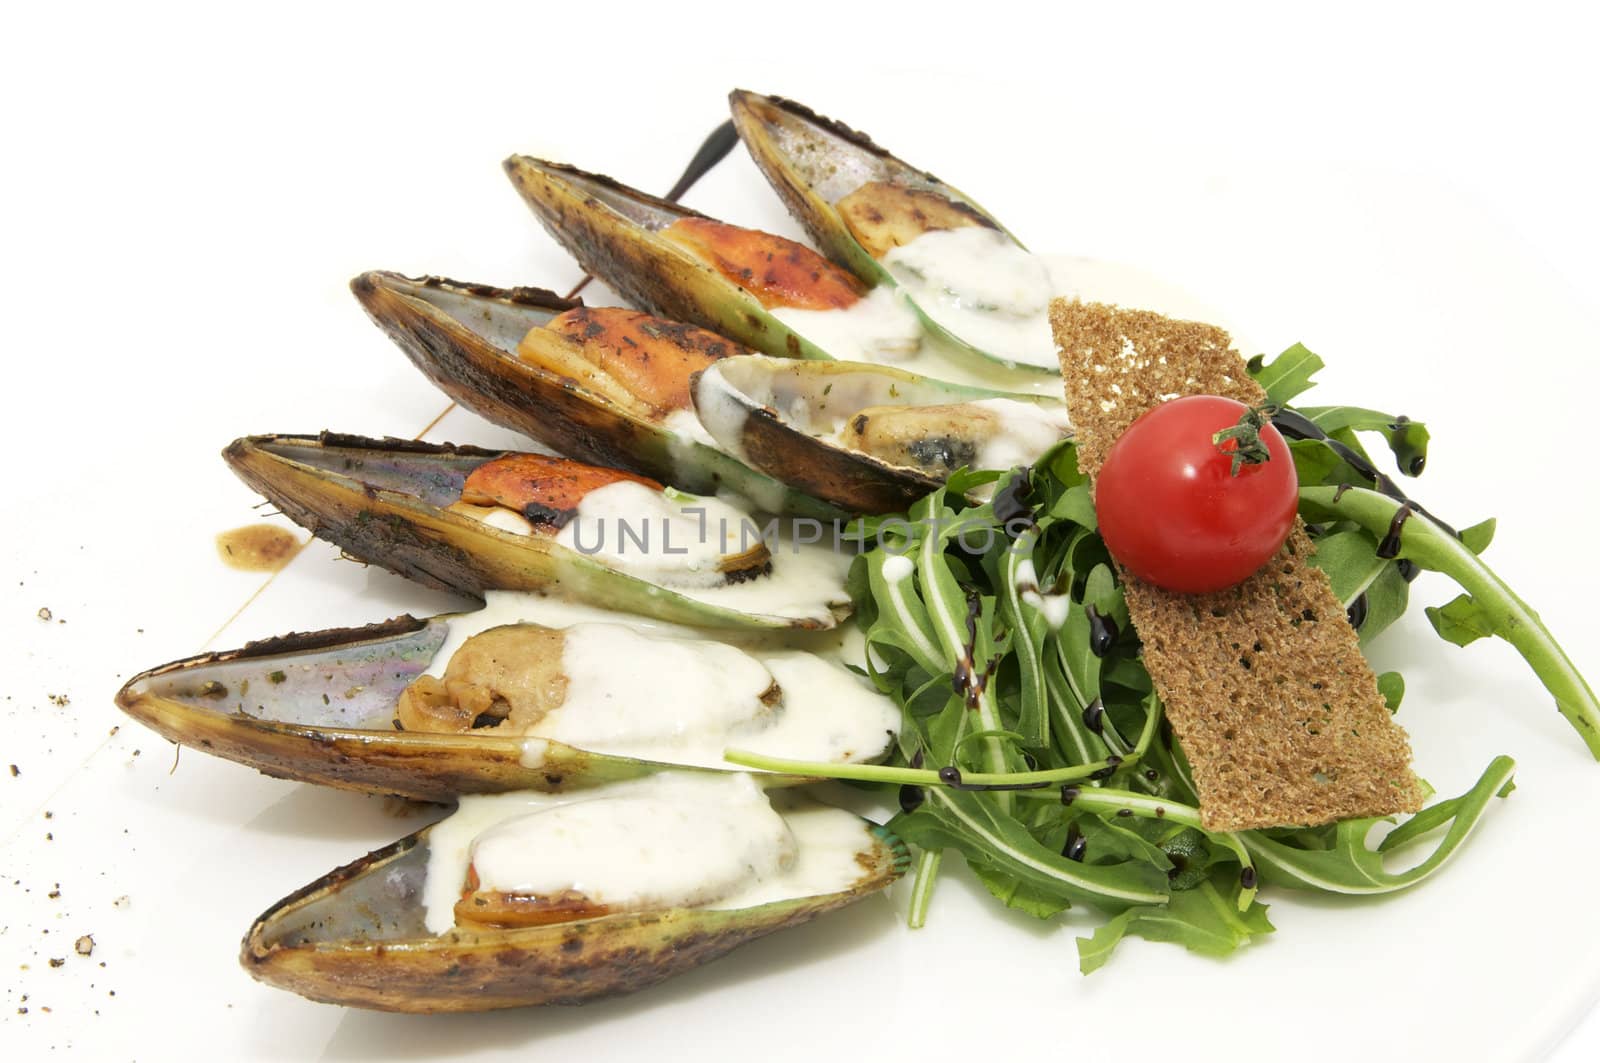 mussel sauce and greens on a white background